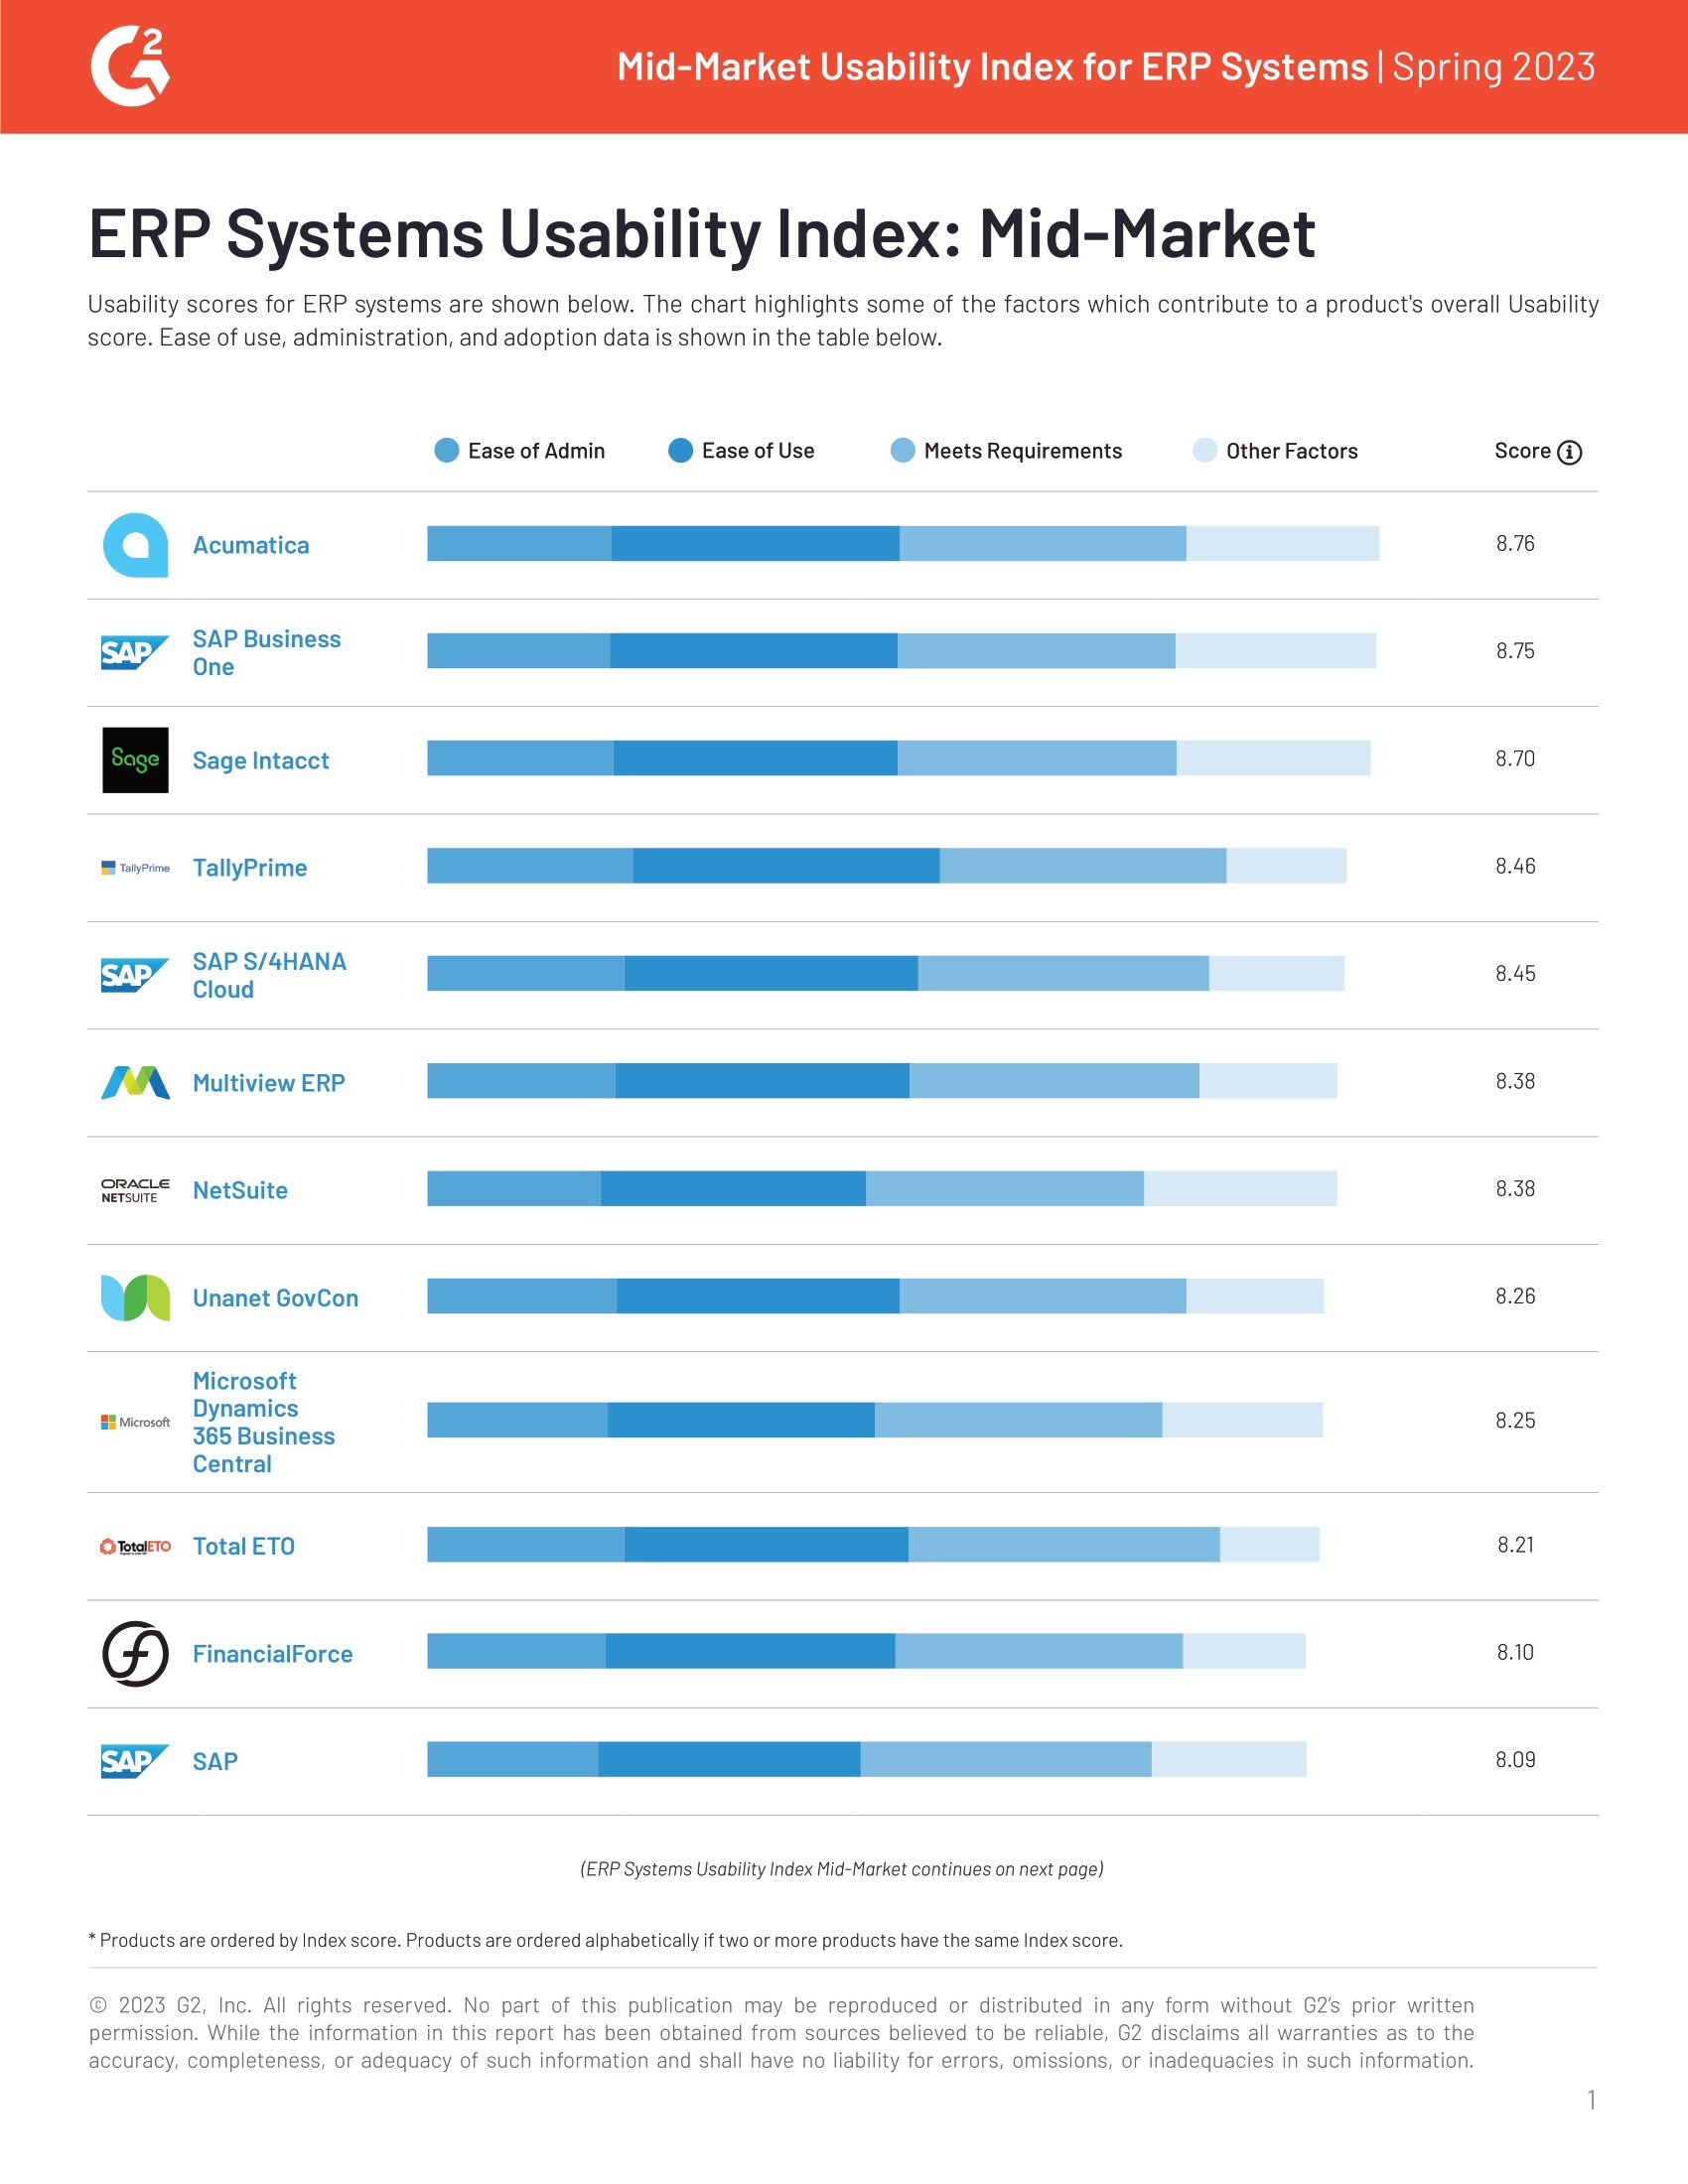 G2 Reviews Acumatica and 34 Other Mid-Market ERPs’ Usability in Spring 2023 Report 